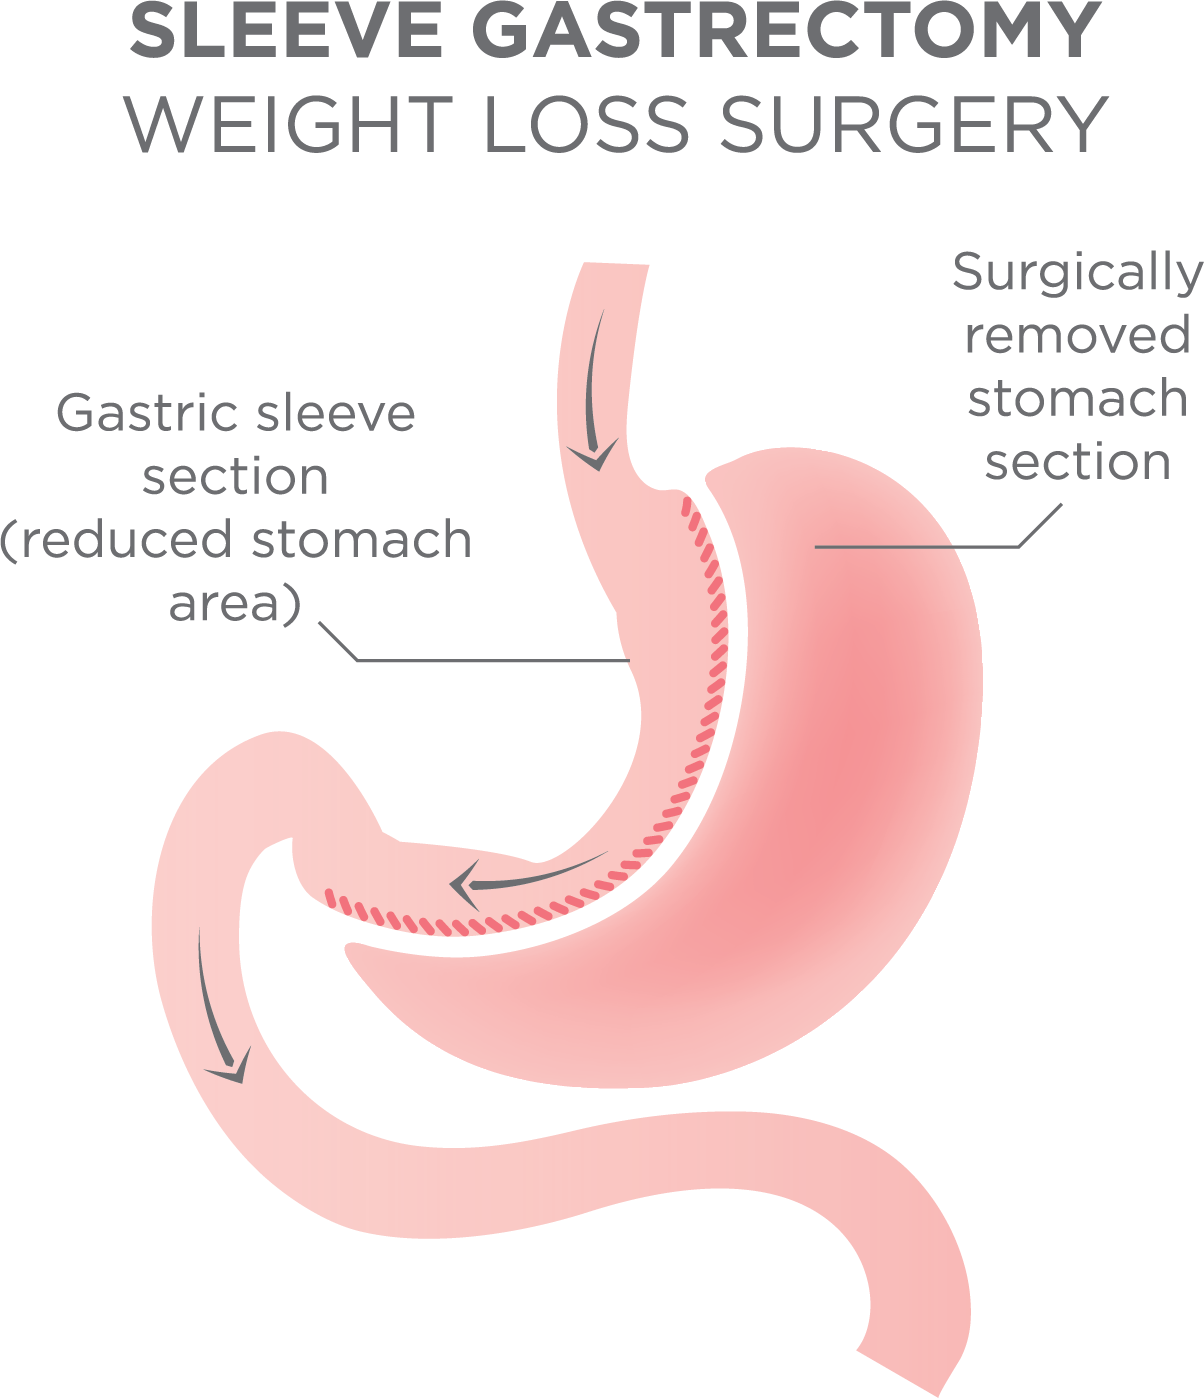 Size of the Stomach After Gastric Sleeve Surgery